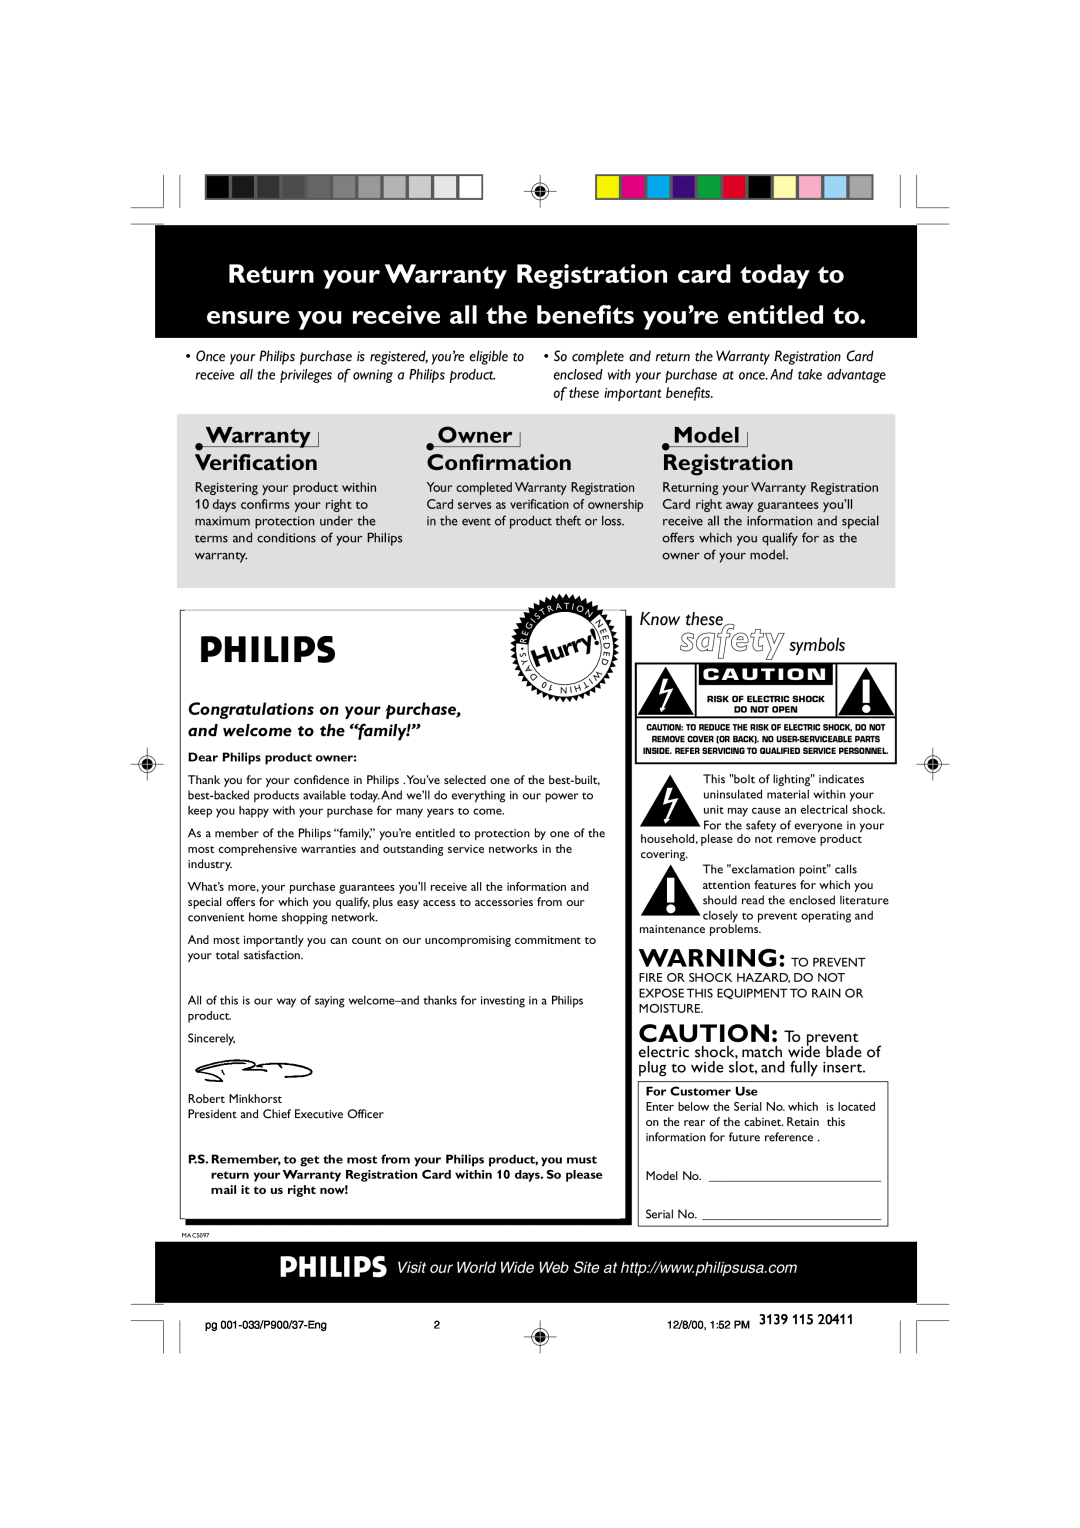 Philips FW-P900 manual Return your Warranty Registration card today to, Warranty Verification, Owner Confirmation, AHurry 